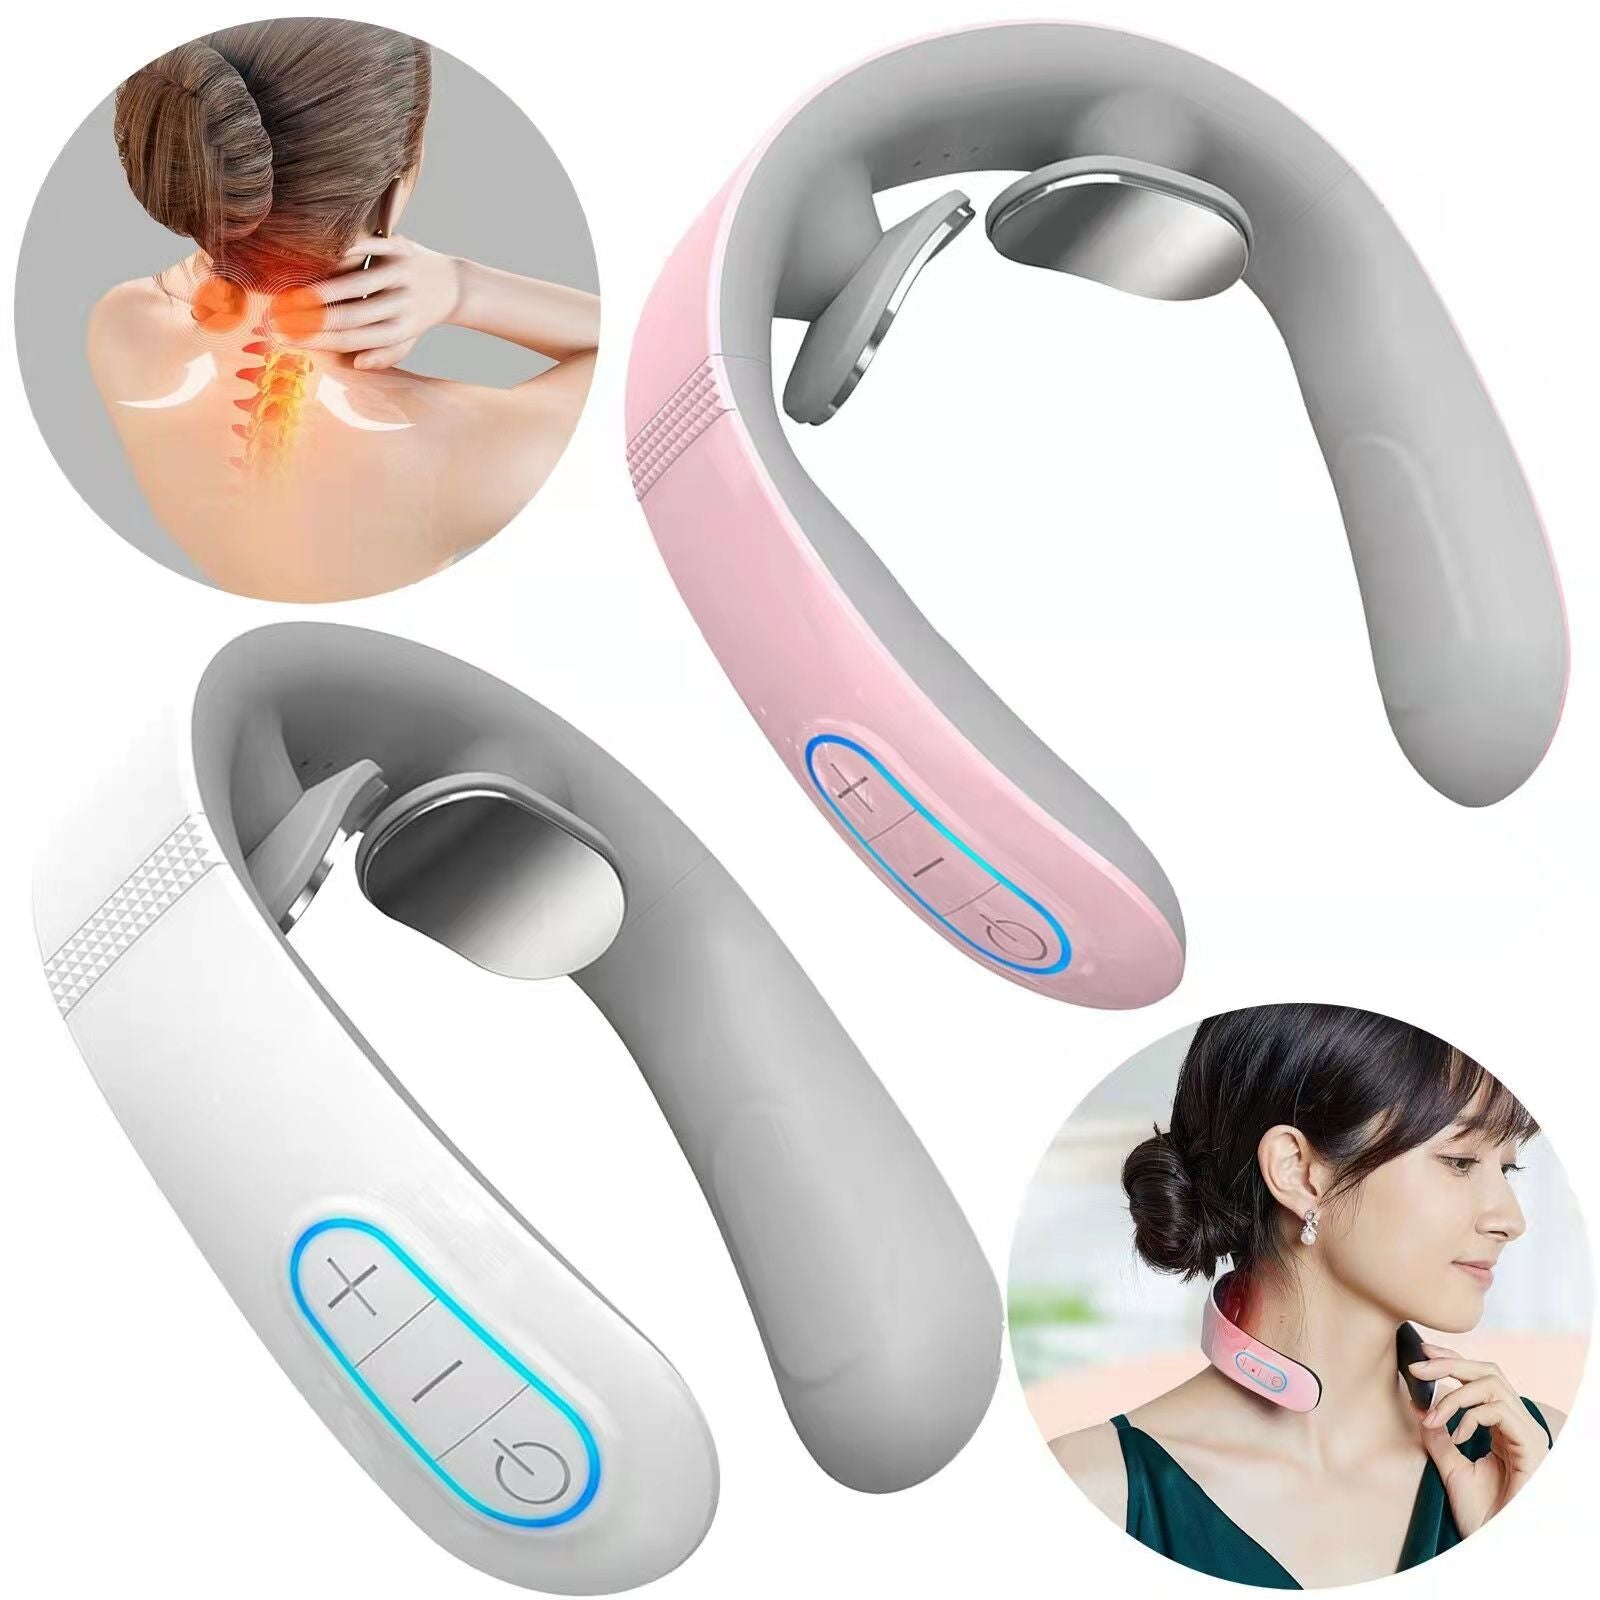 Relaxing Portable Personal Masseur